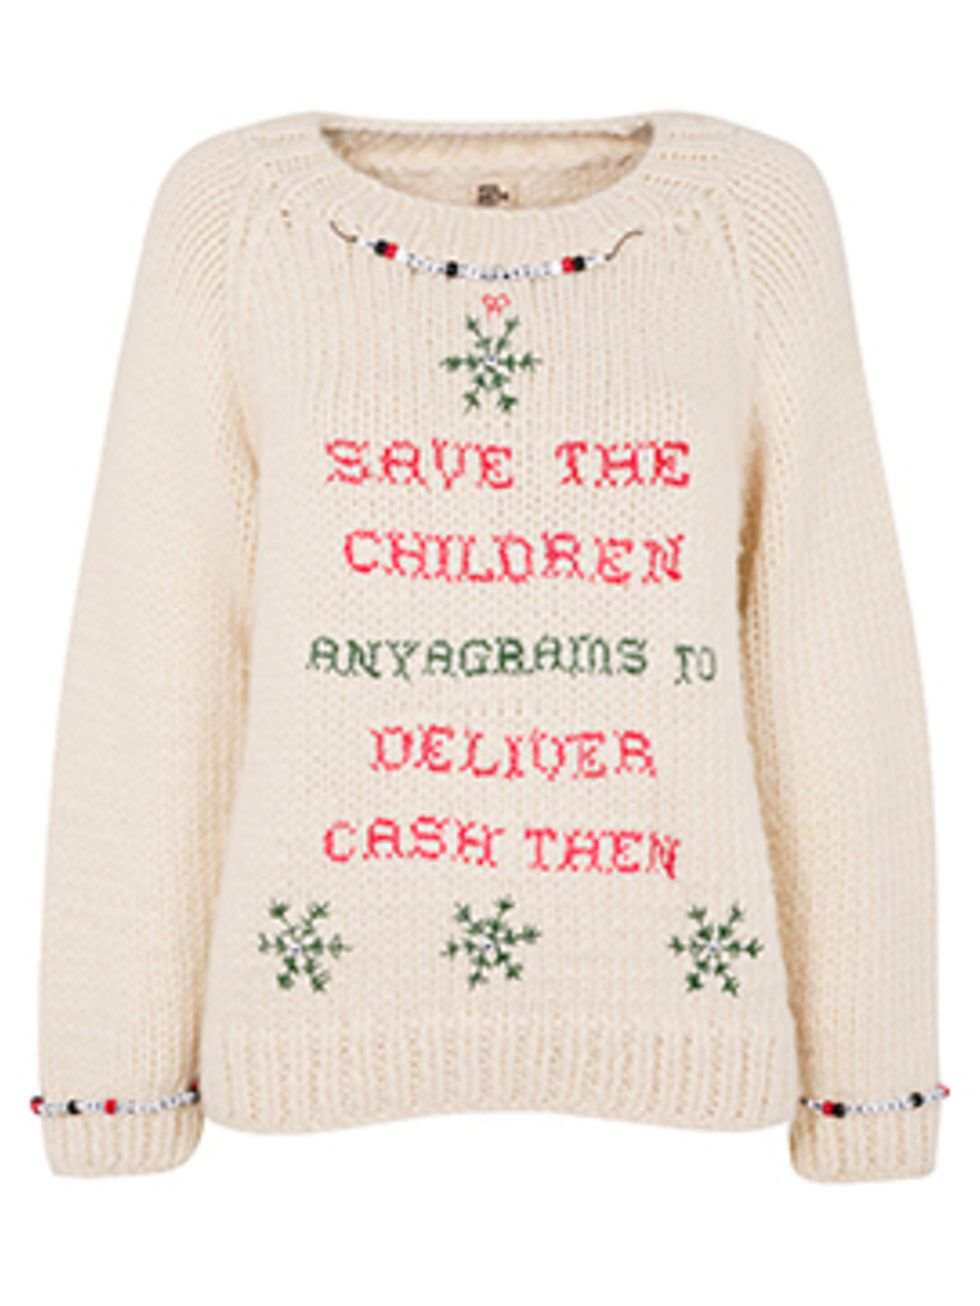 <p>Save The Children Christmas jumper by Anya Hindmarch</p>